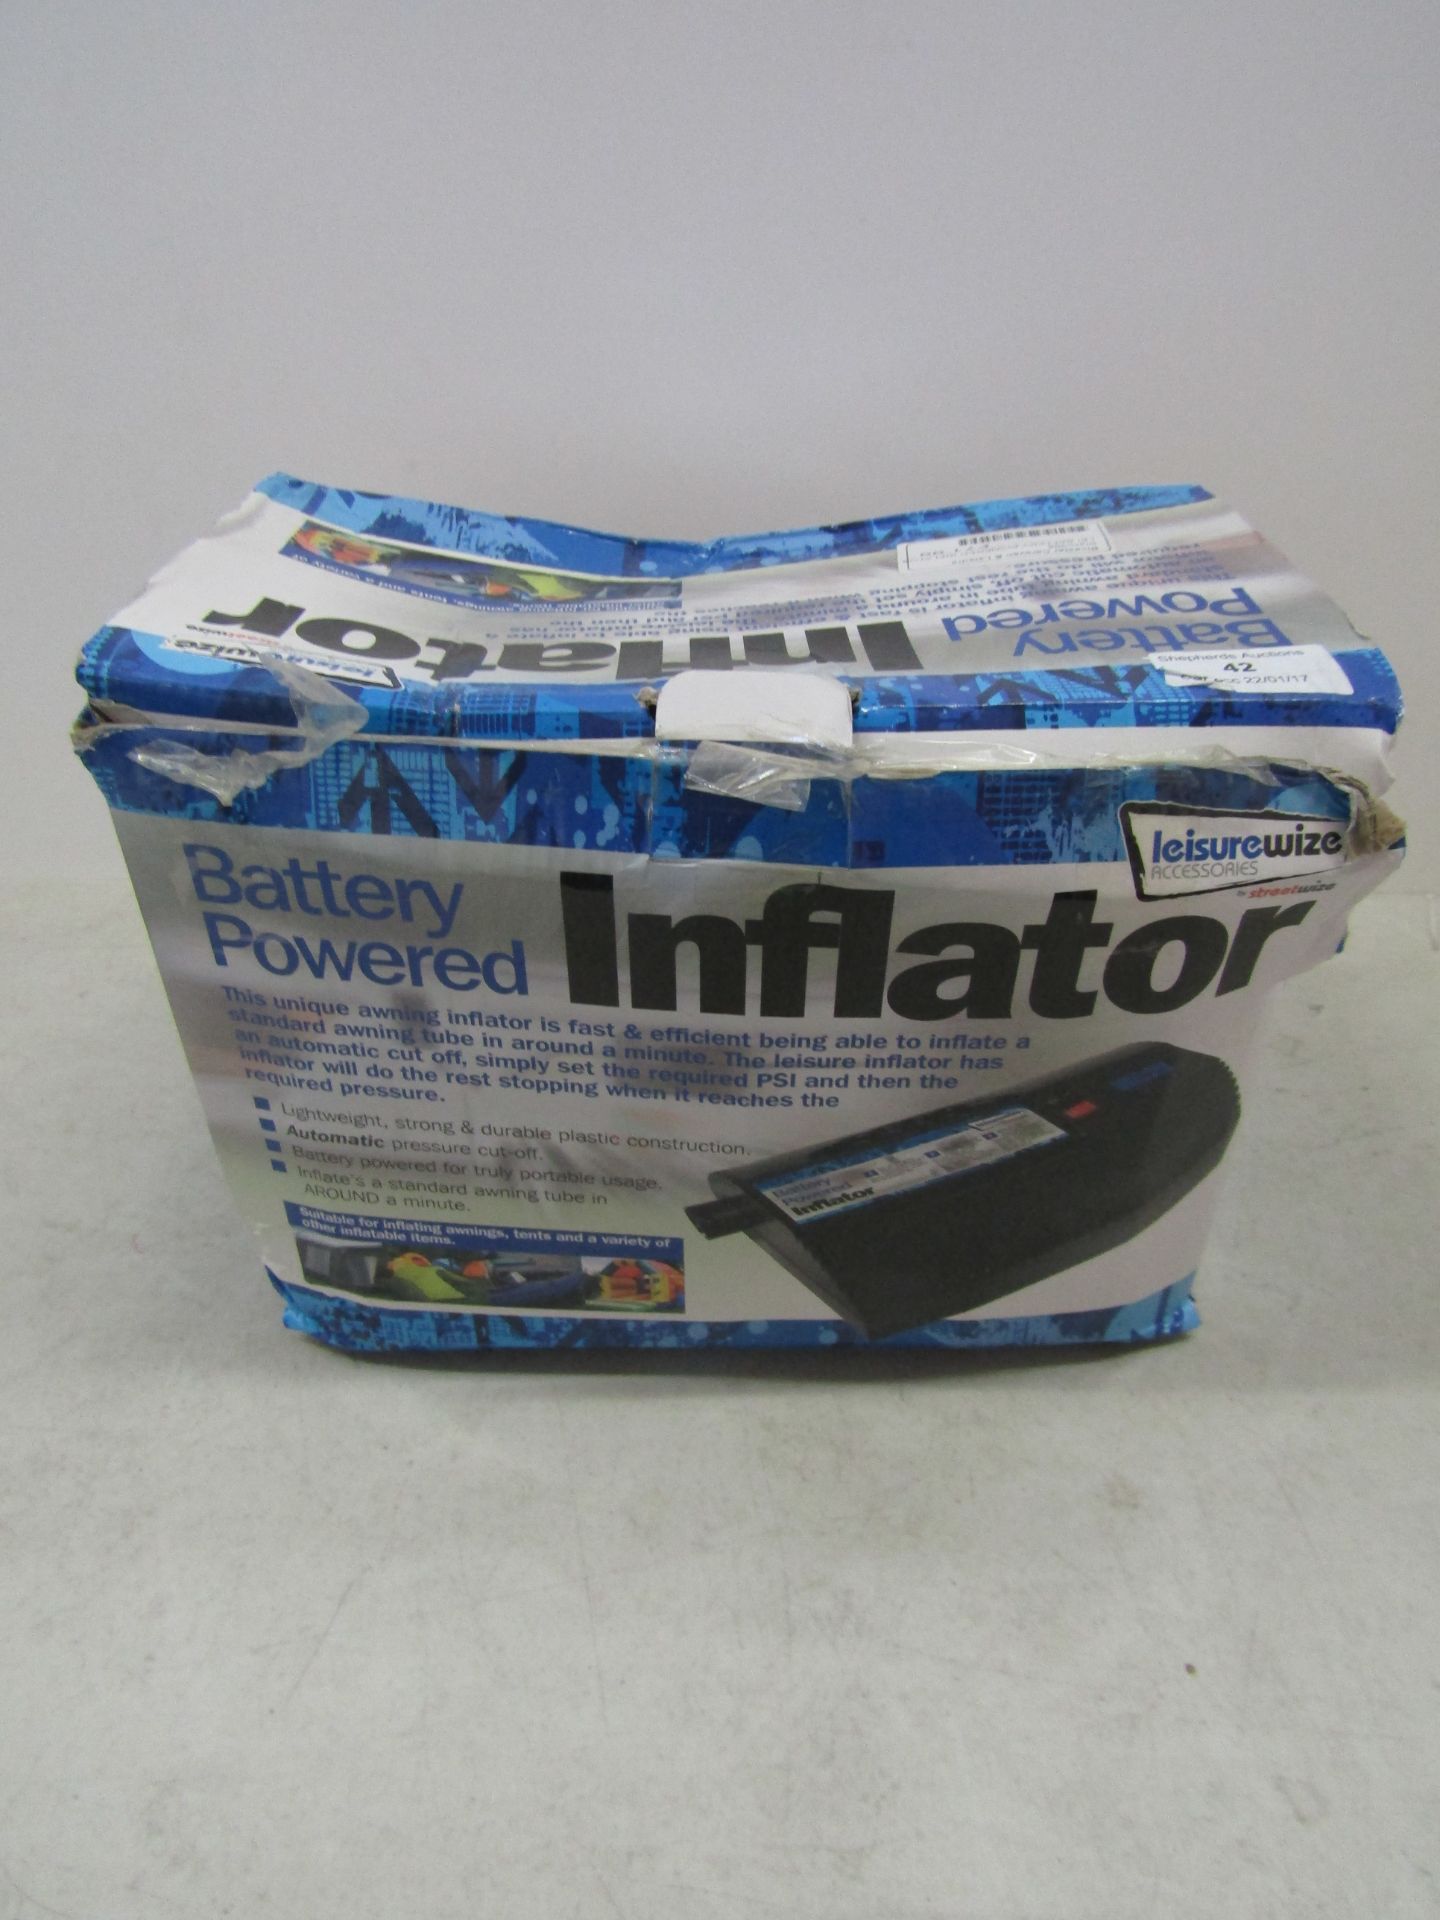 Battery powered inflator, unchecked and boxed.